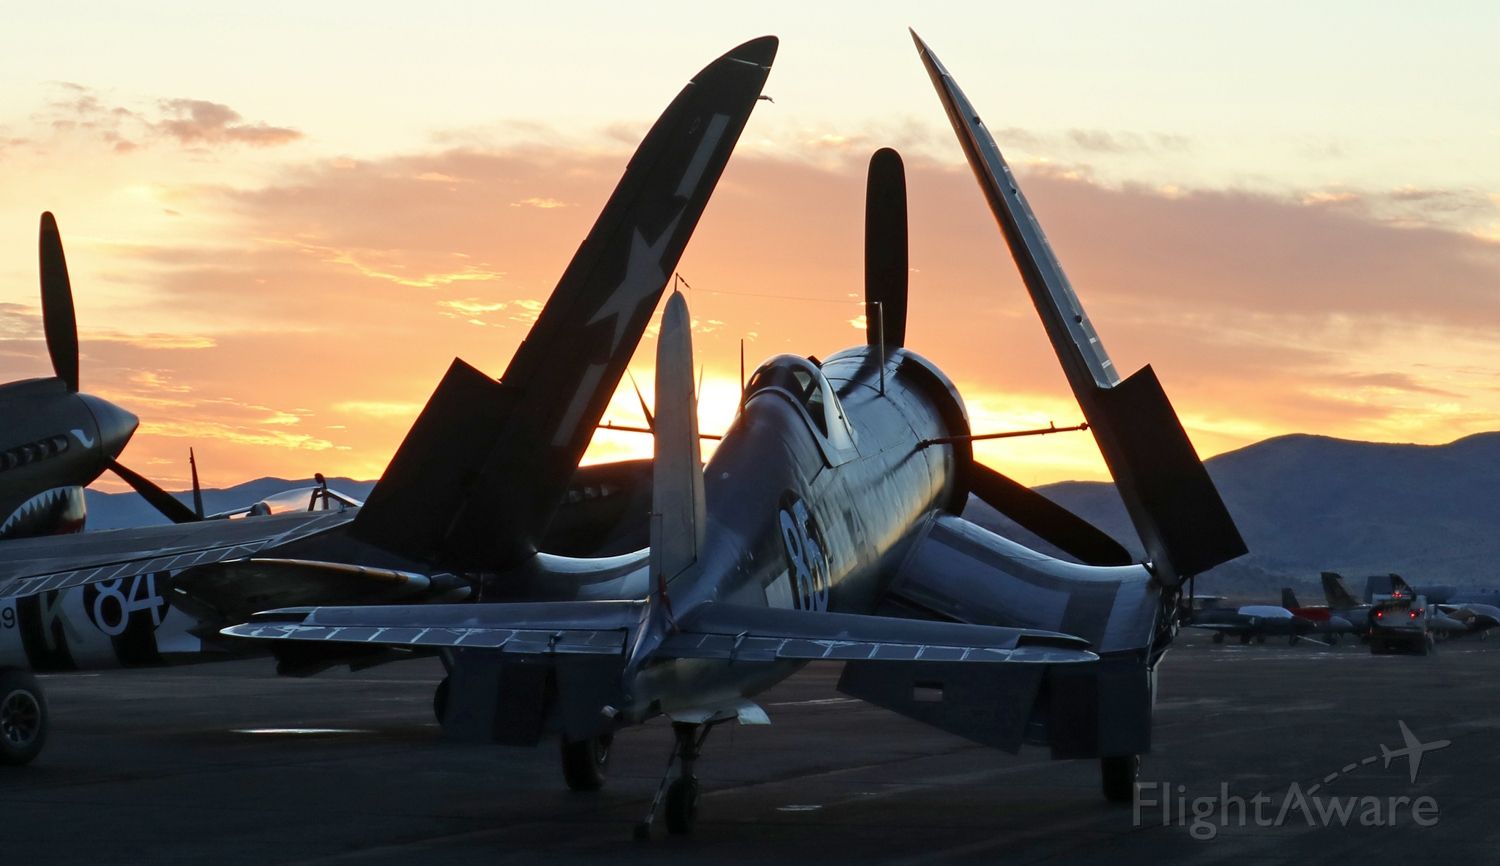 N209TW — - The first day of the 2017 Reno Air Races (aka: National Championship Air Races) started in spectacular fashion this morning when the Texas Flying Legends Museum personnel positioned their aircraft on the ramp for a sunrise photo op.  This shot captures their Goodyear FG-1D Corsair (N209TW / NX209TW) from behind as the sun is coming up over Reno Stead Airport.br /br /Recommend clicking on FULL for best viewing.